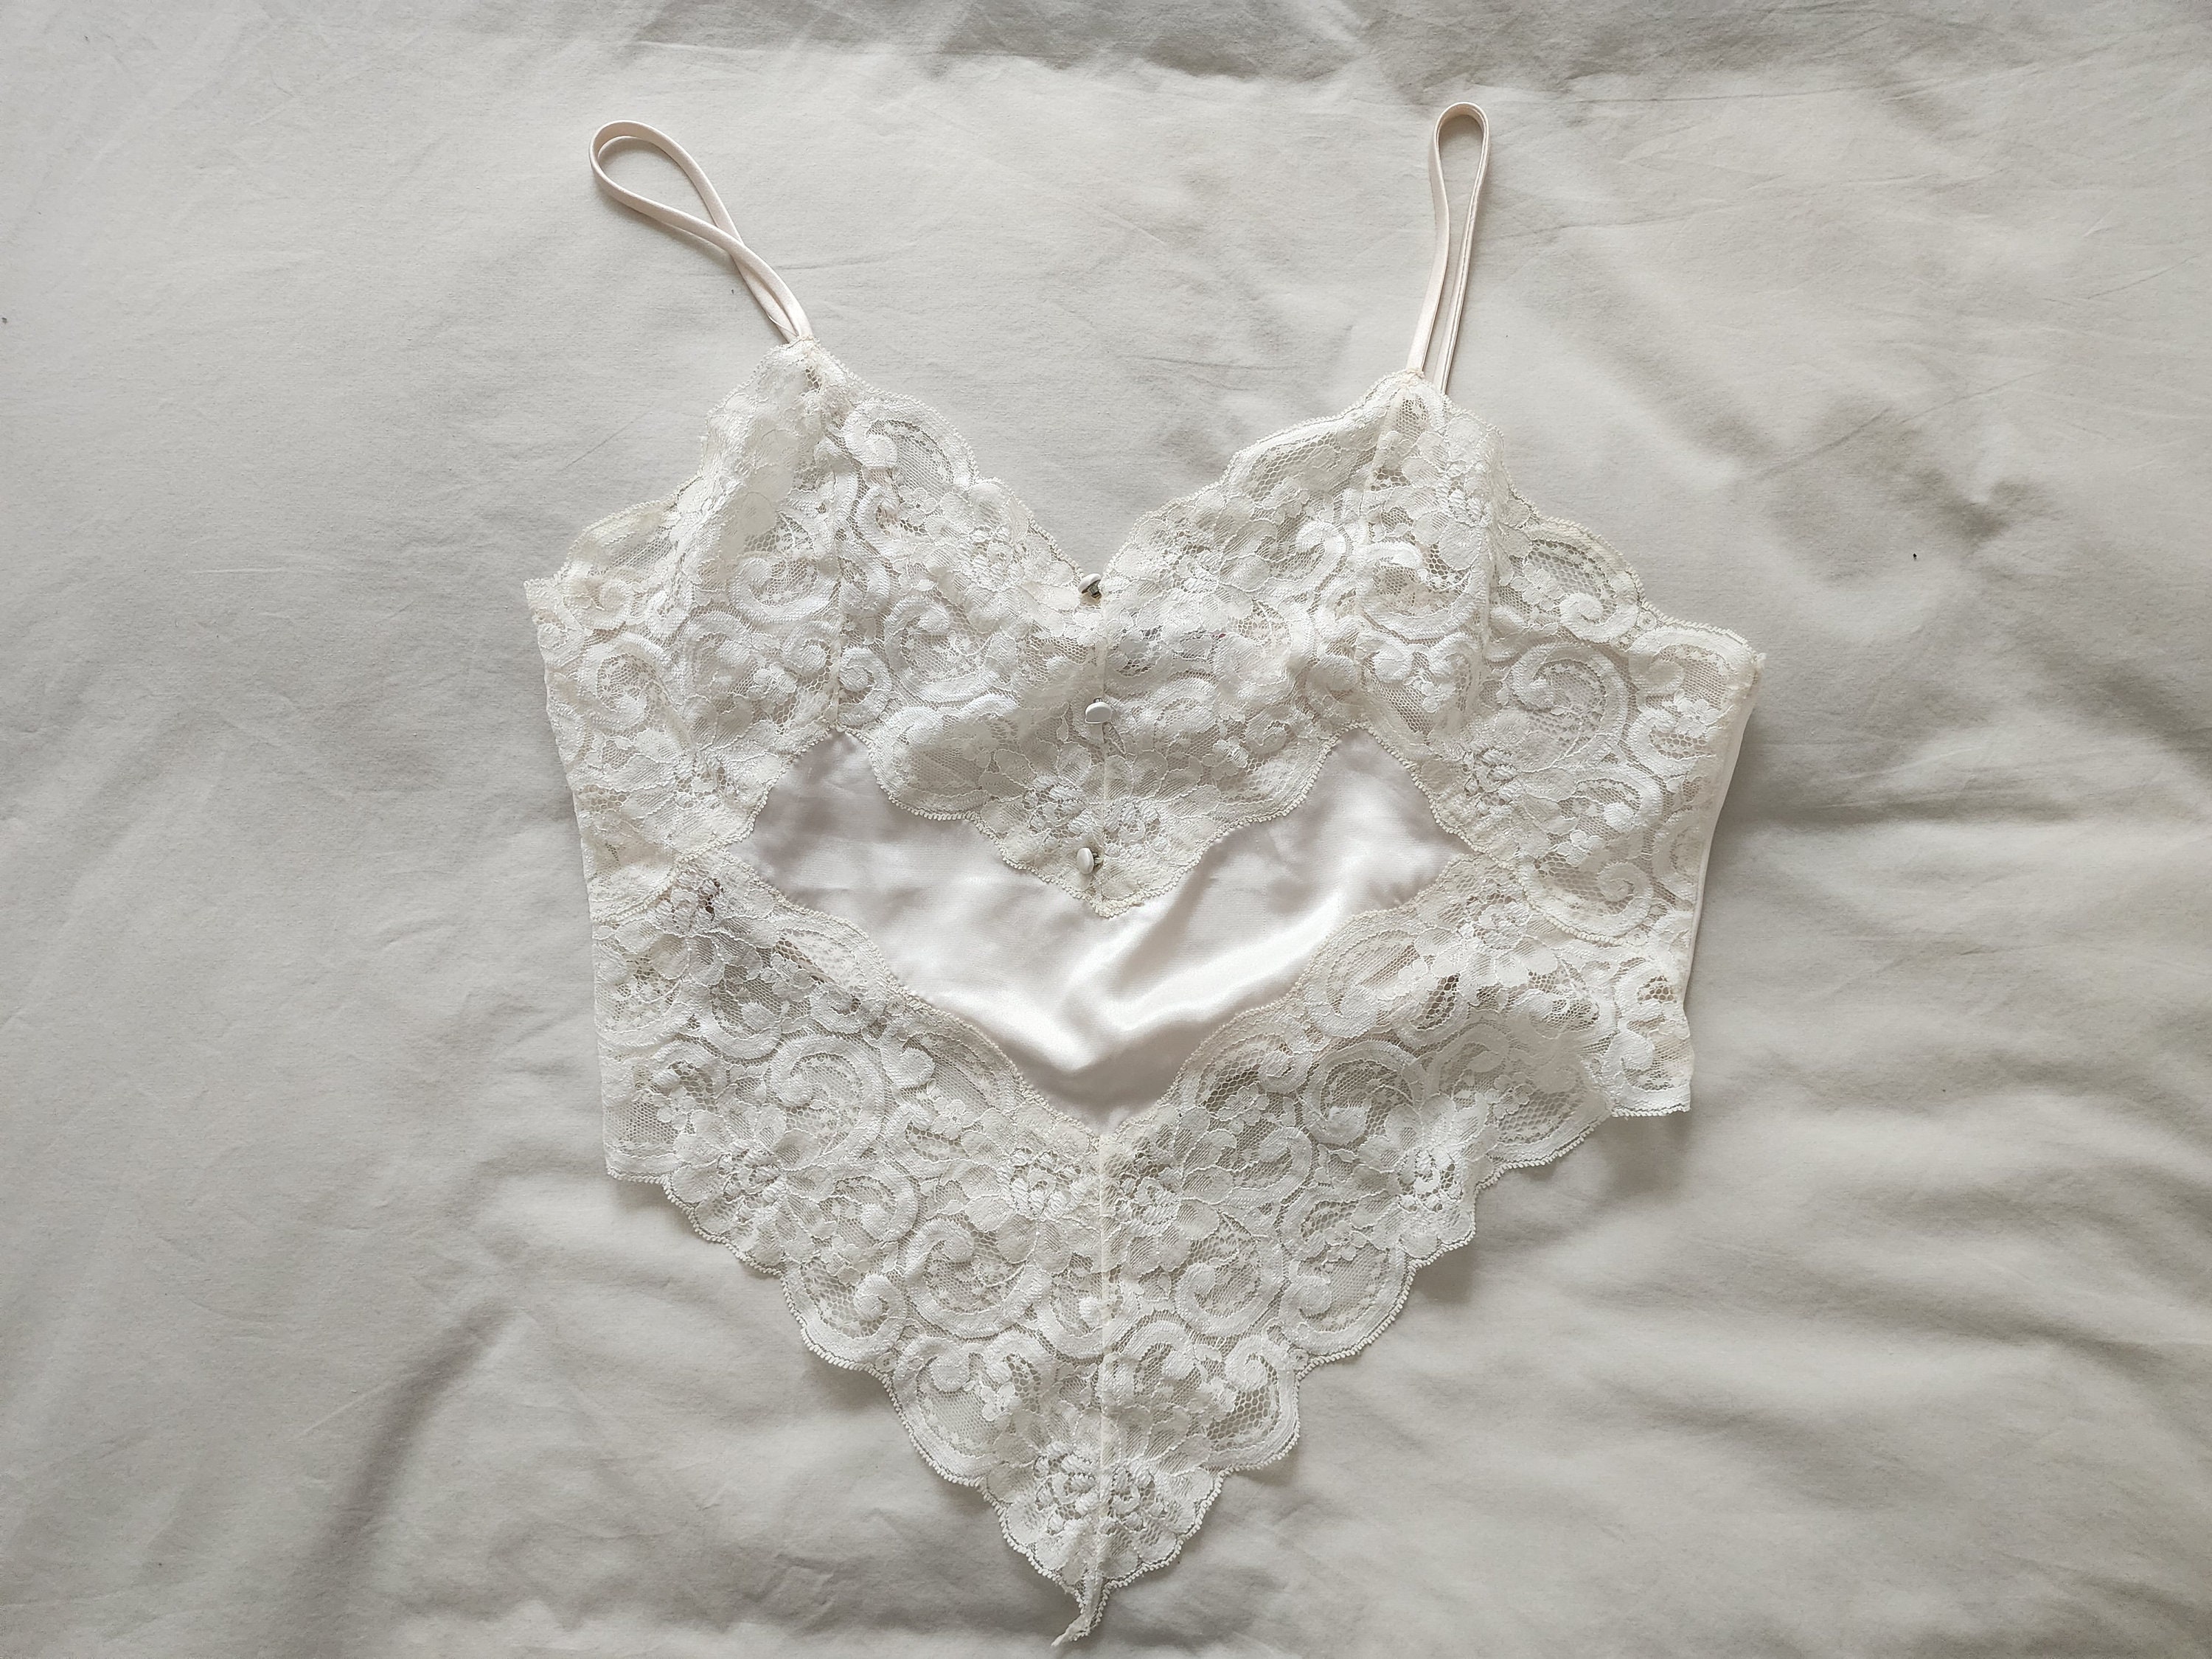 Vintage Lace Backless Lace Camisole Bra Crop Top For Women 2022 Summer  Underwire Sexy Vest Perfect Mothers Day Gift From Gengbao20909222, $13